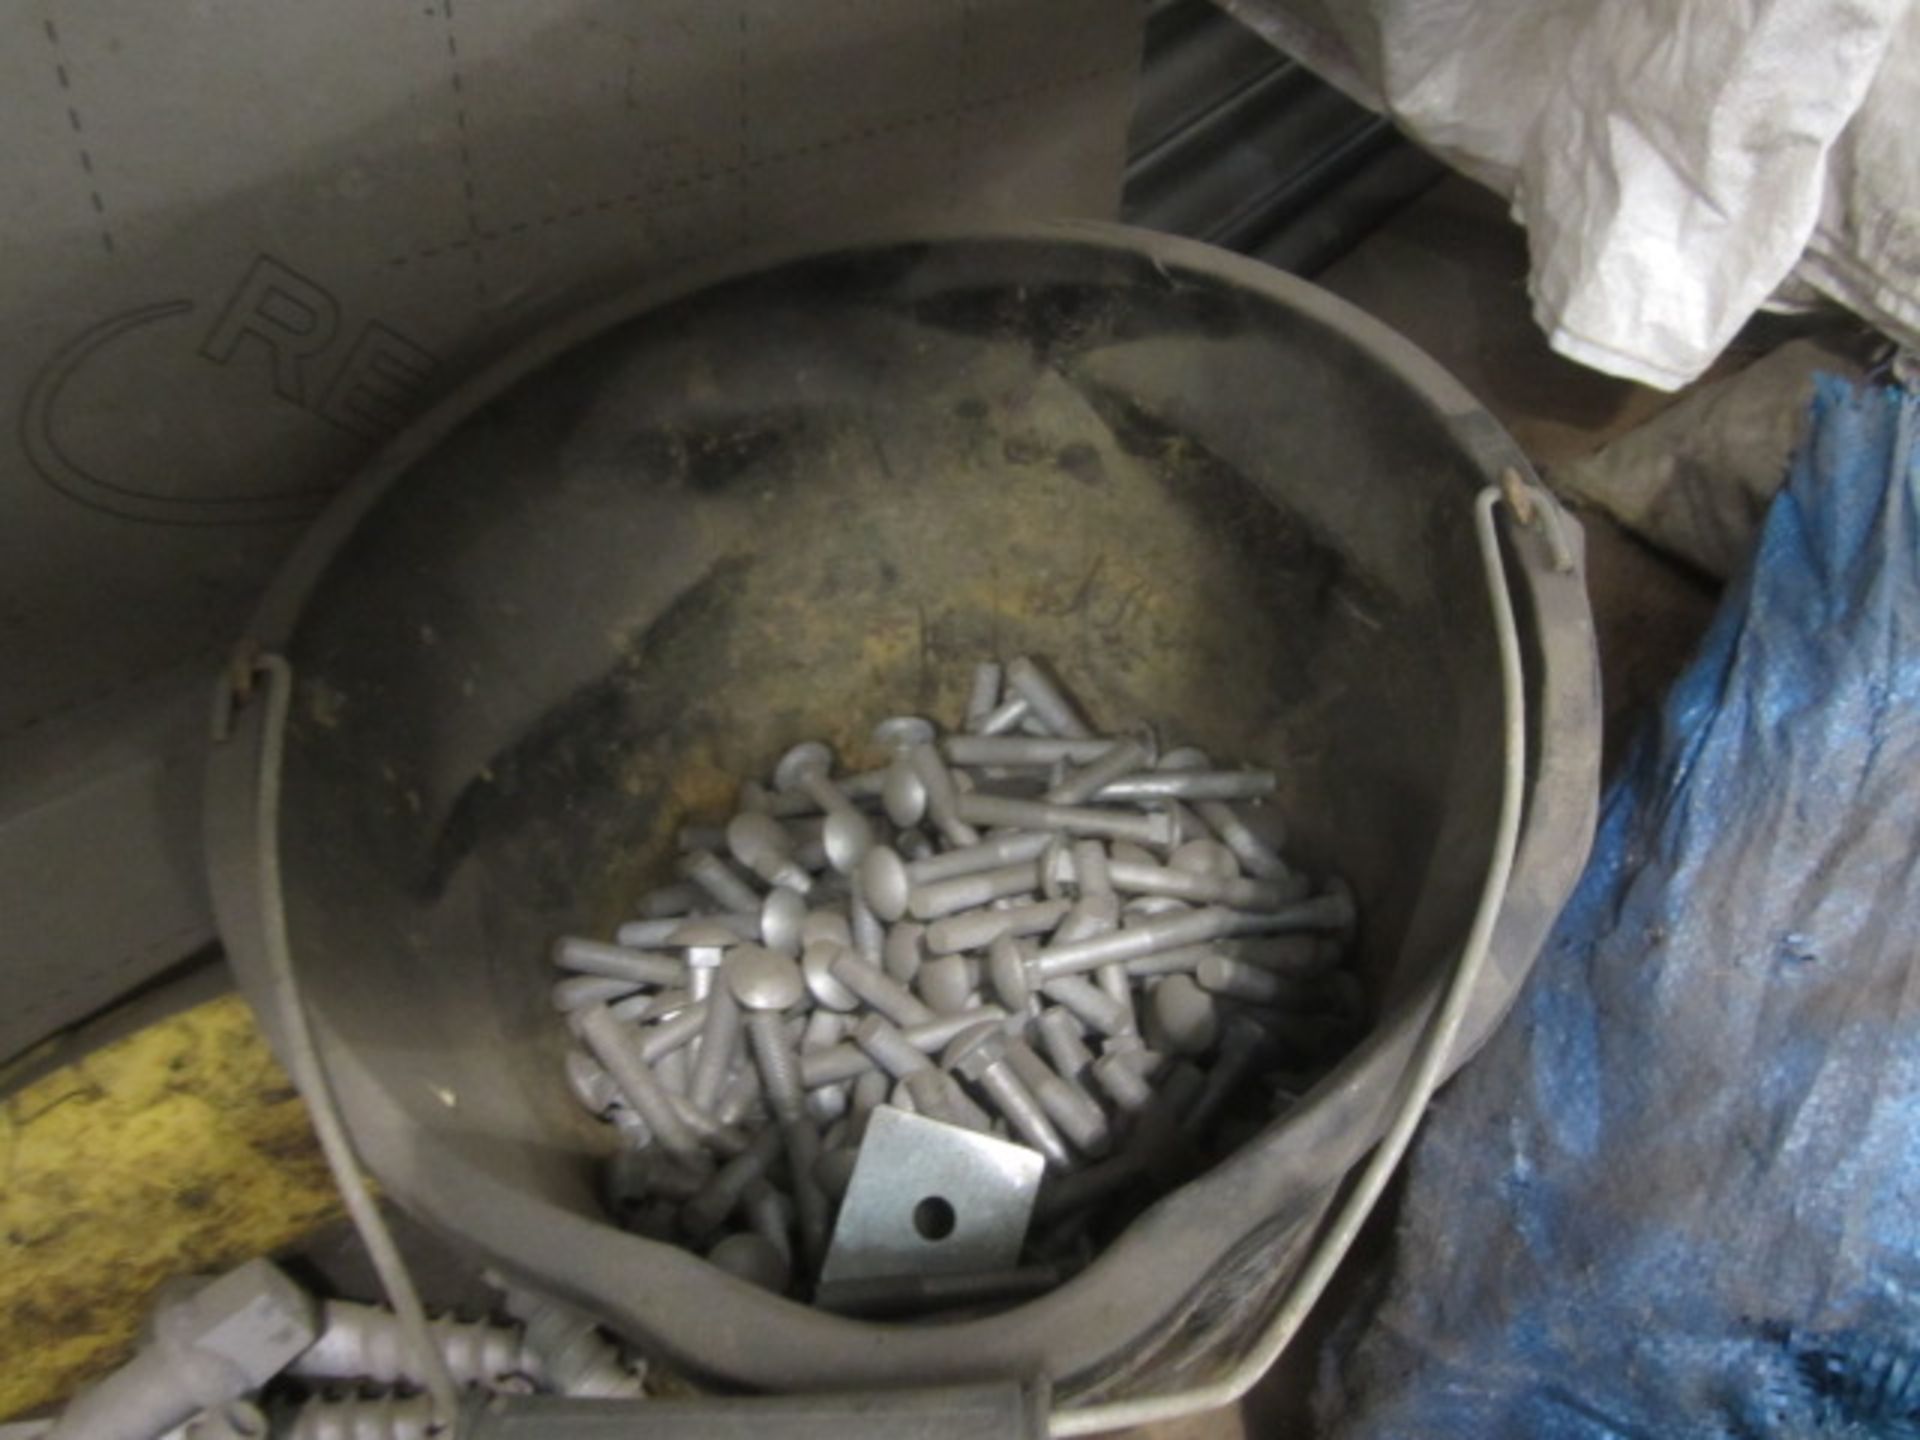 Contents of bay of racking including steel profiles, heavy duty bolts, metal clips etc., as lotted - - Image 8 of 19